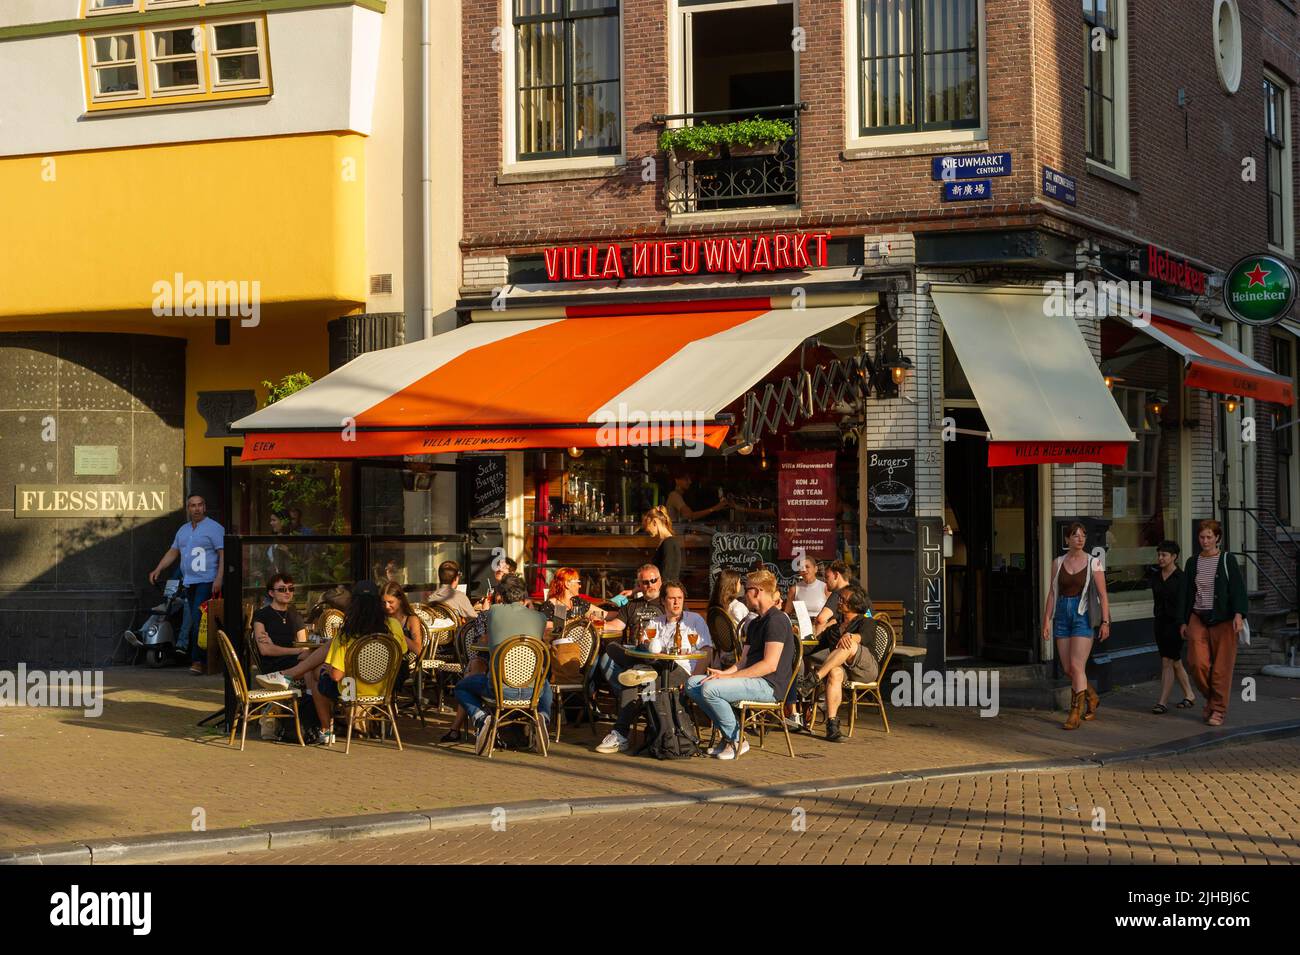 Dining at sunset on the Niewmarkt, Amsterdam, The Netherlands Stock Photo